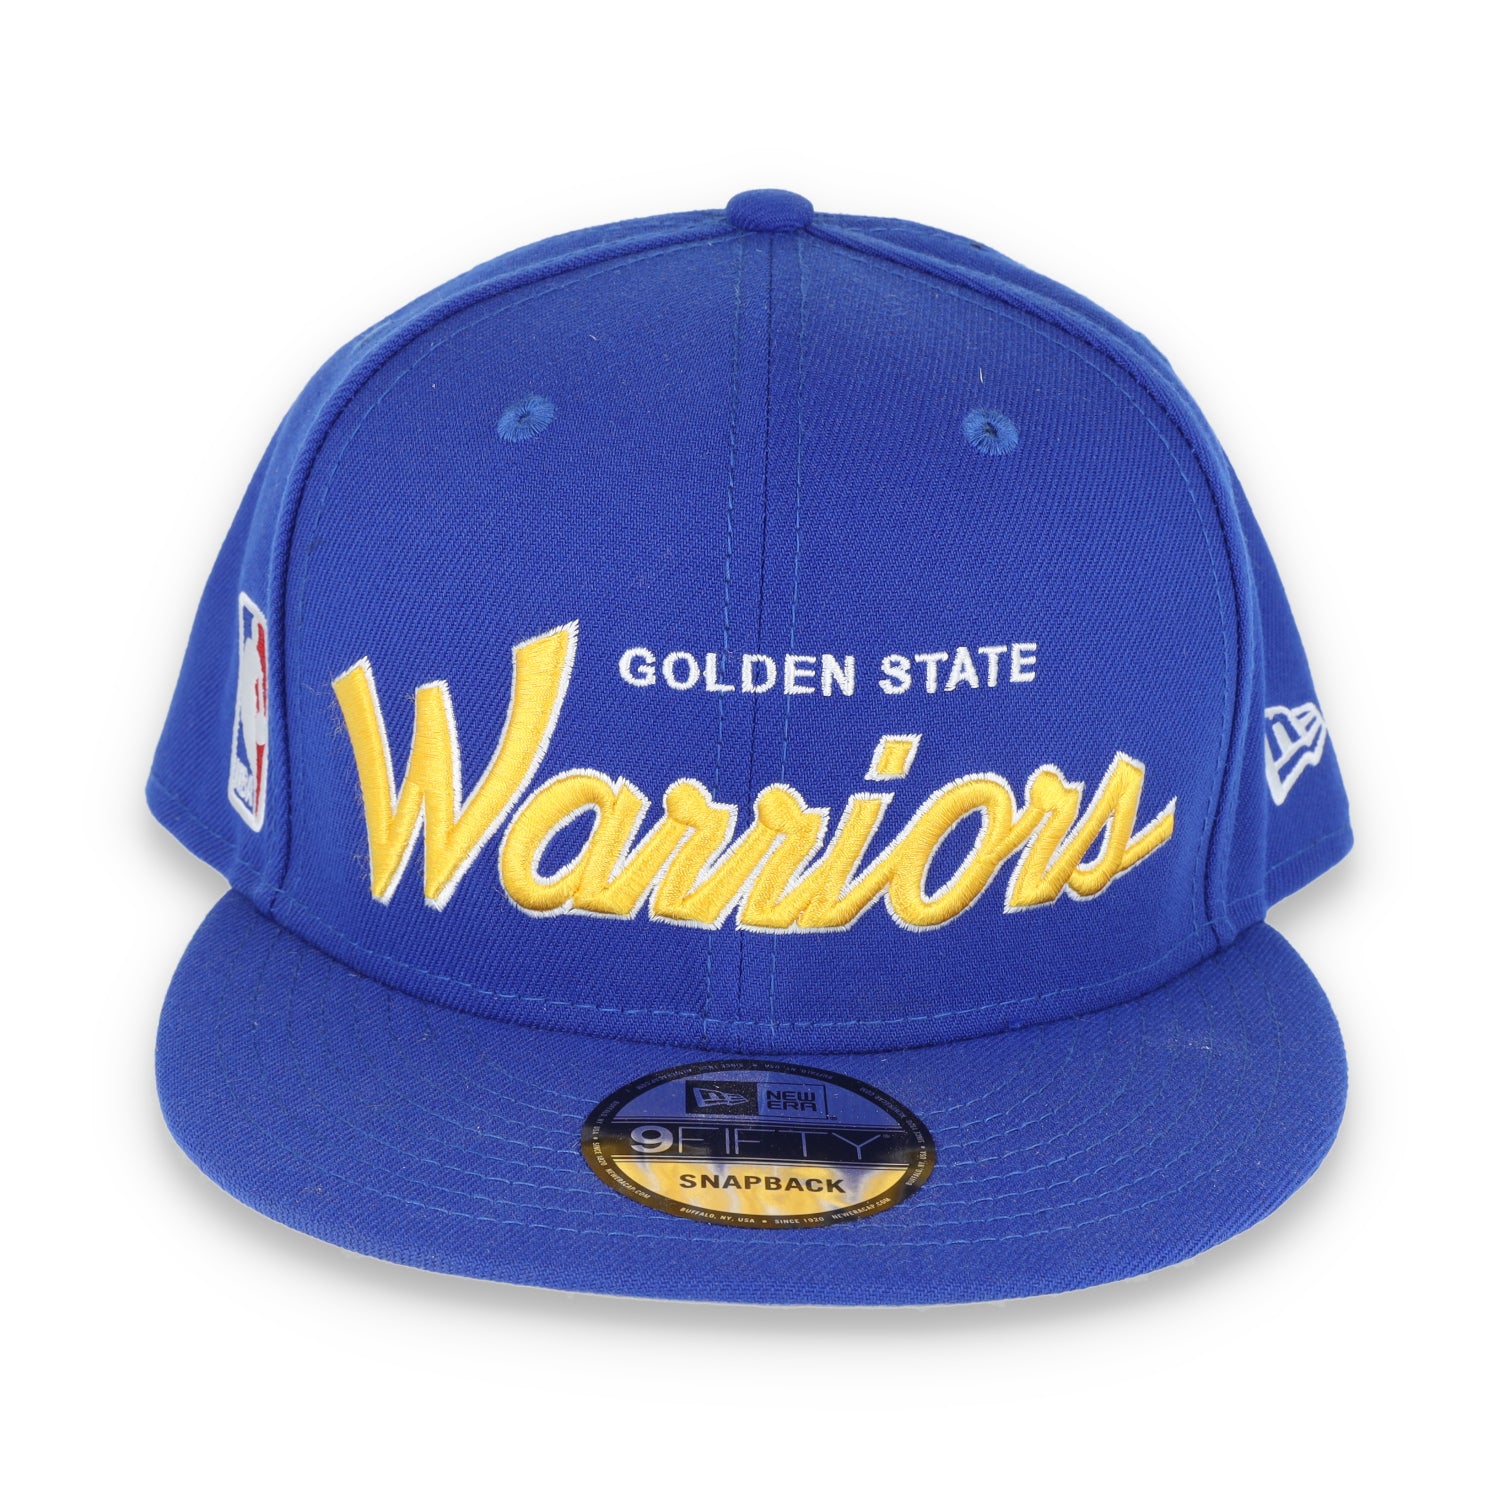 Golden State Warriors New Era Script Up Edition 9FIFTY Snap Hat